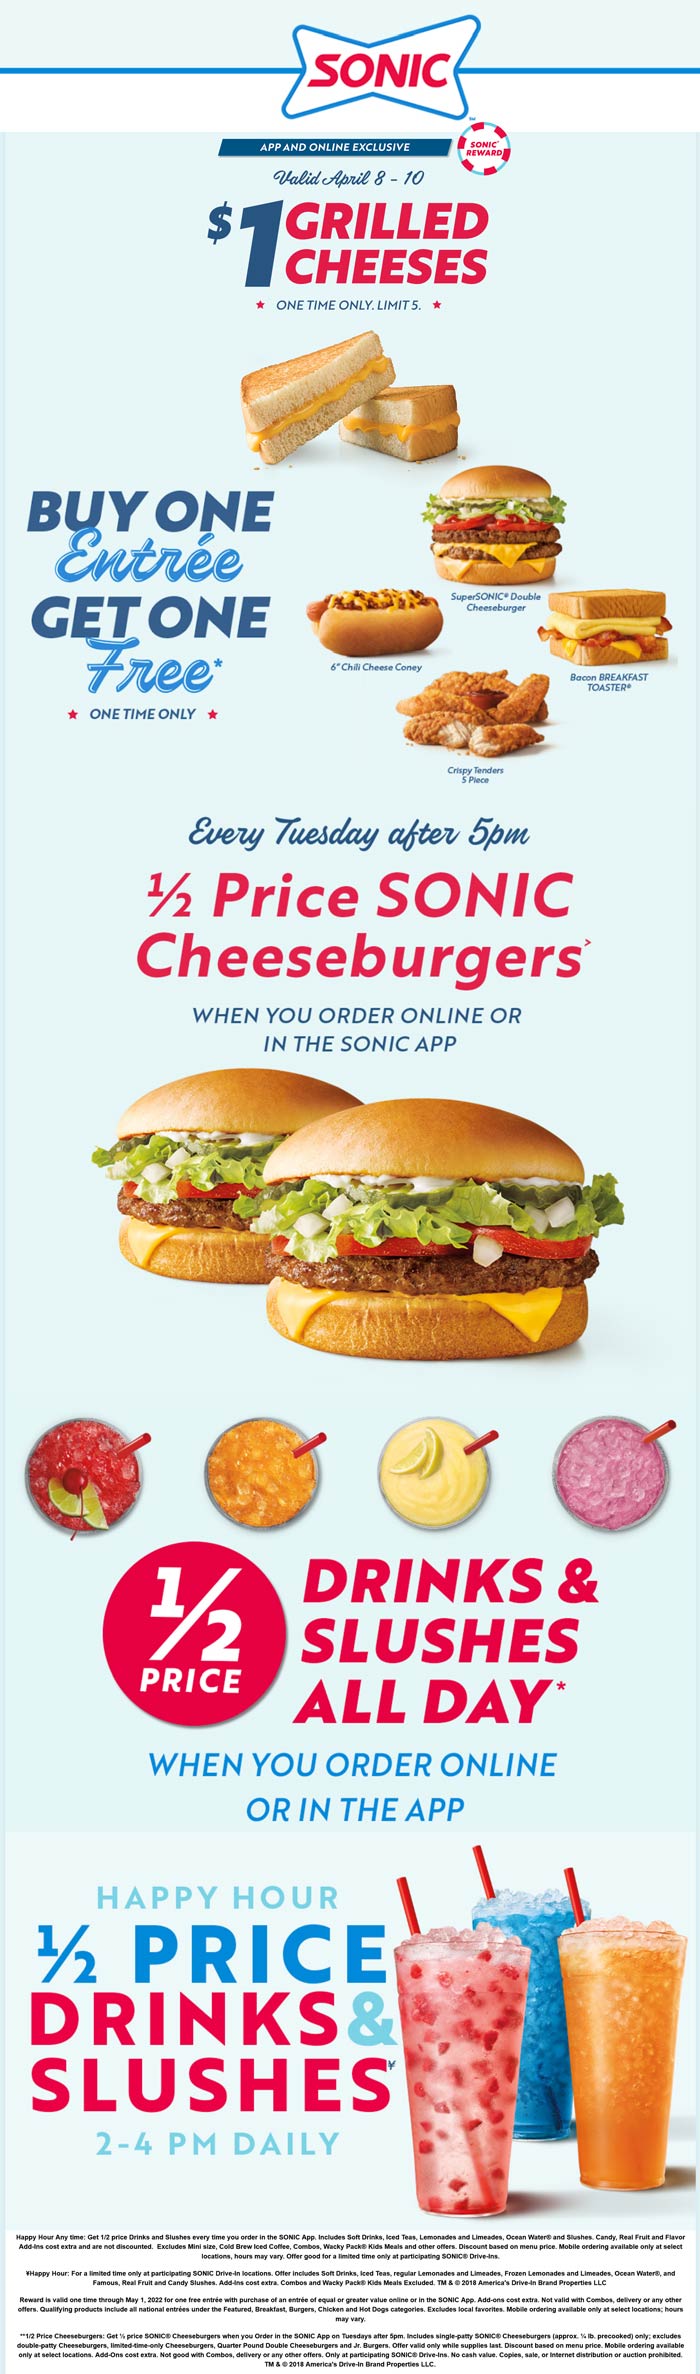 Sonic Drive-In restaurants Coupon  $1 grilled cheese sandwich & more online at Sonic Drive-In #sonicdrivein 